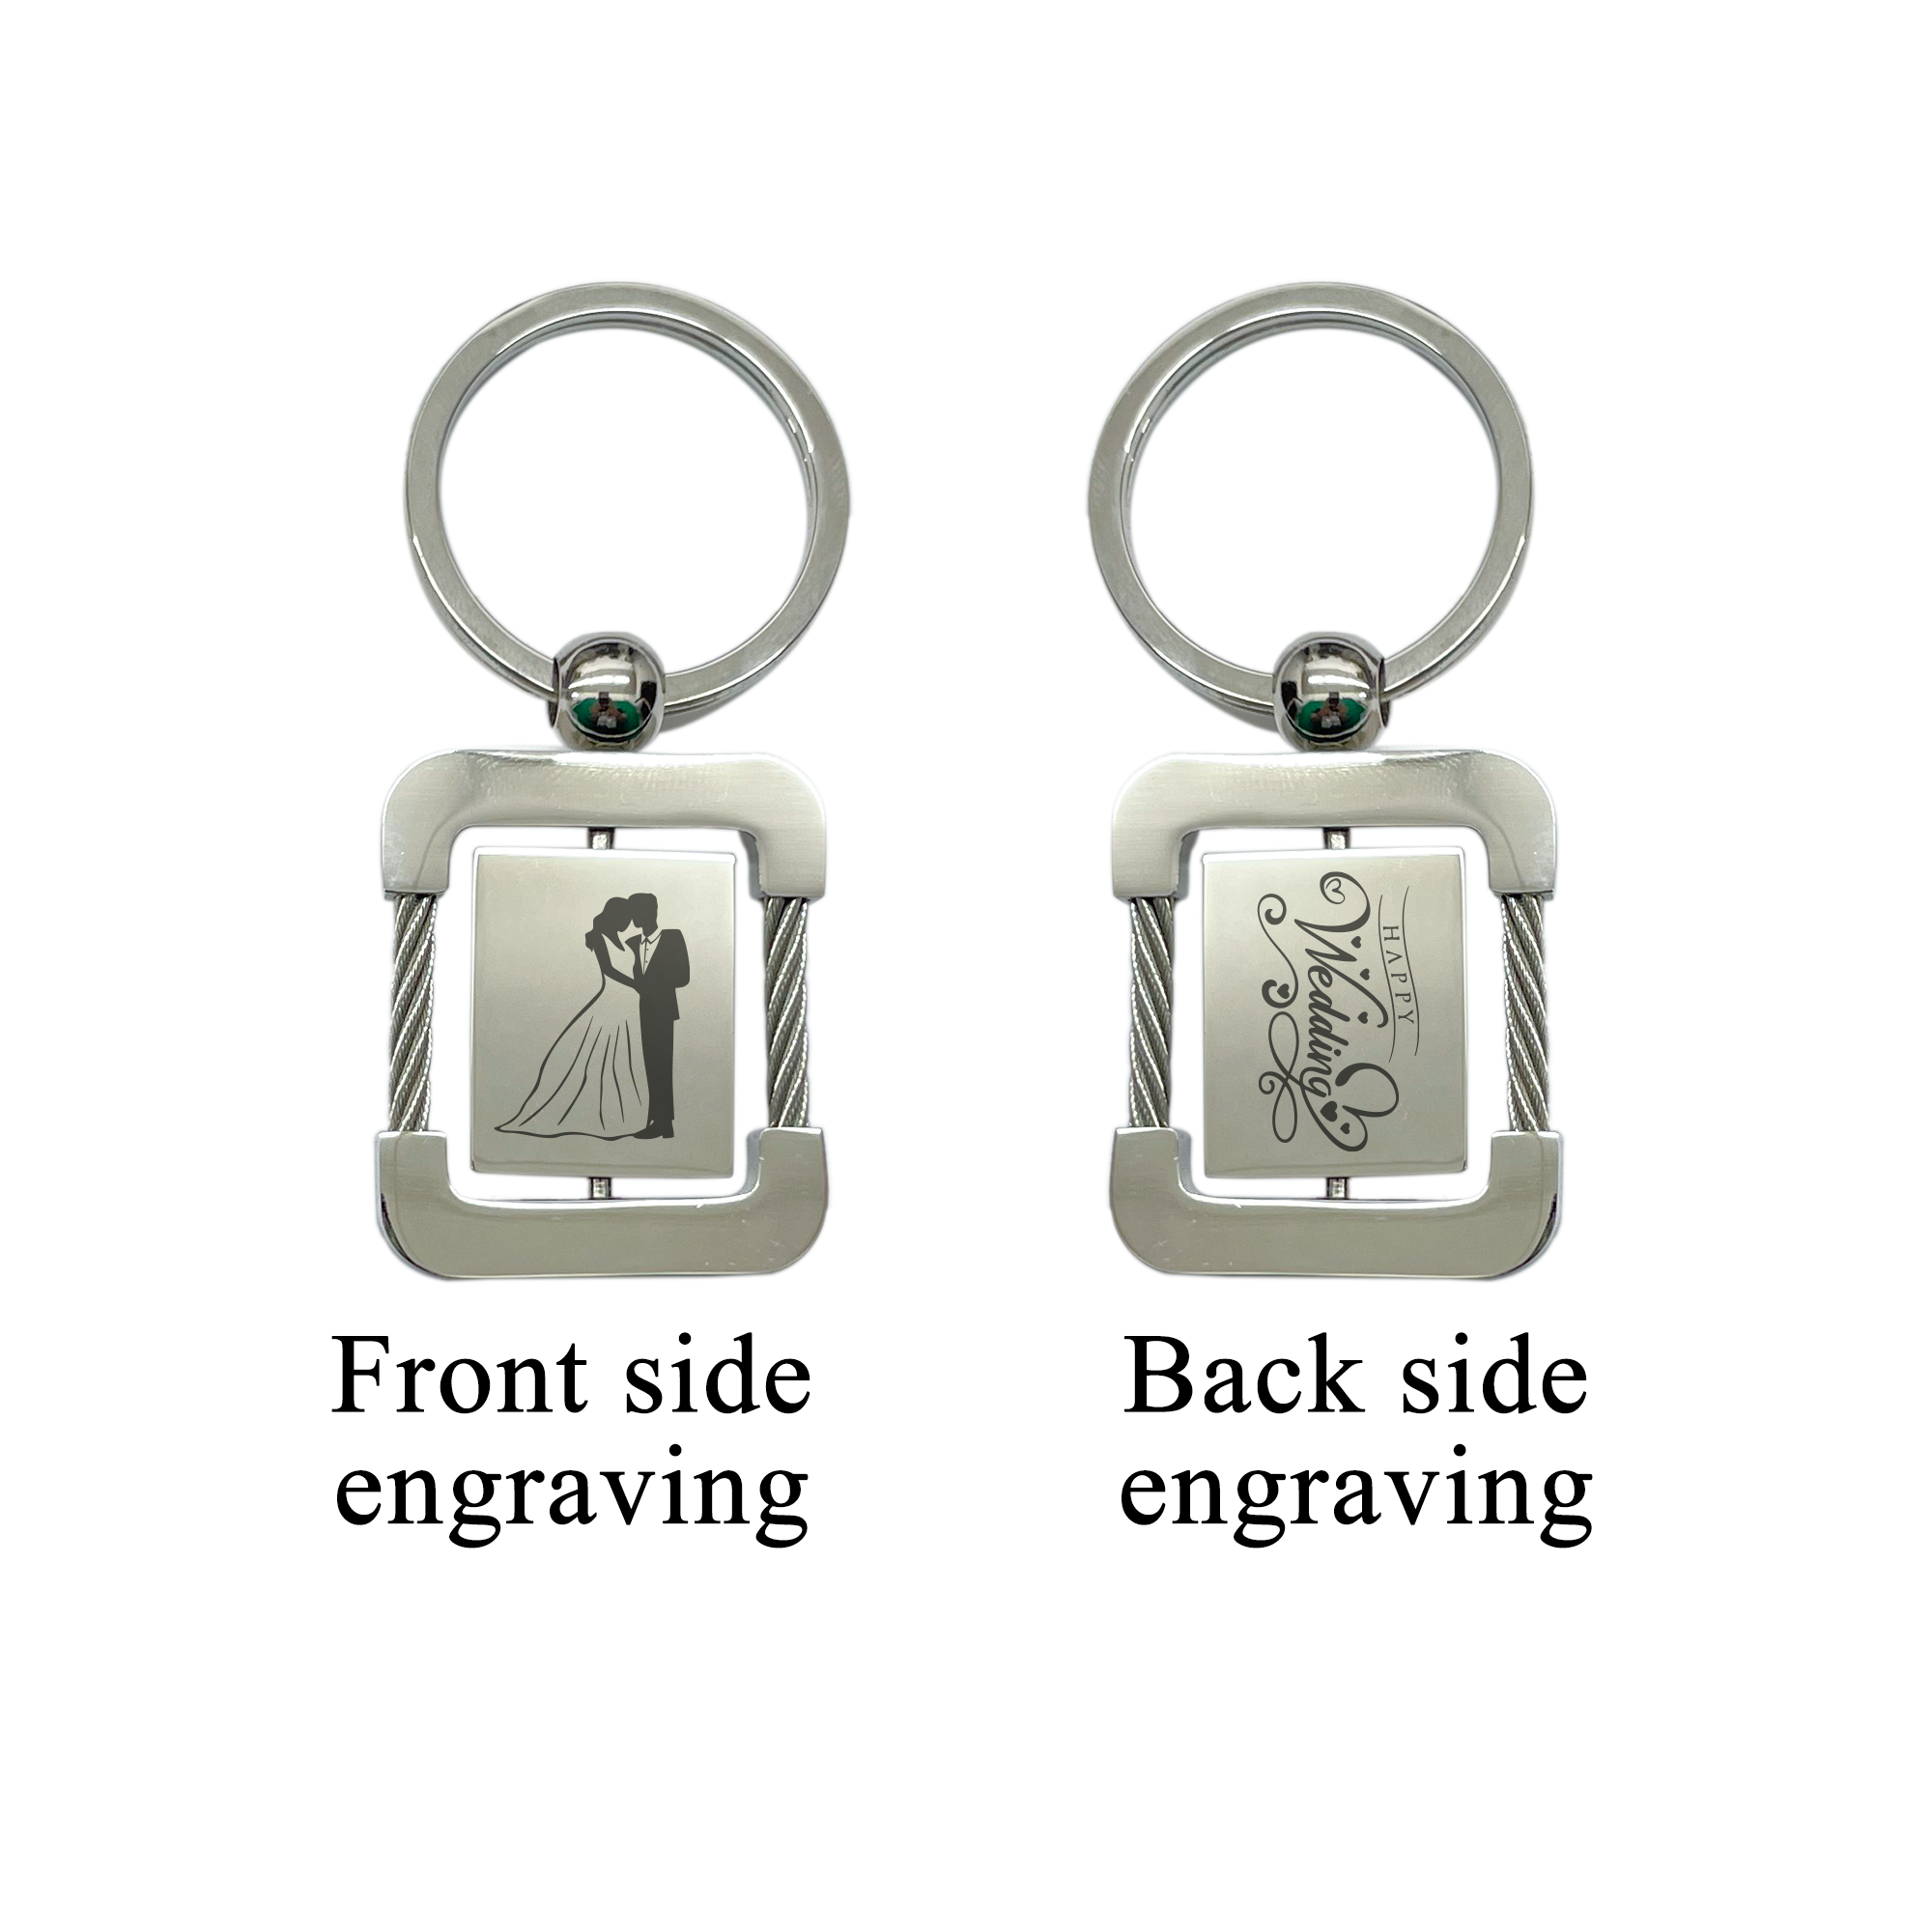 Double rotating square keychain CH 0103